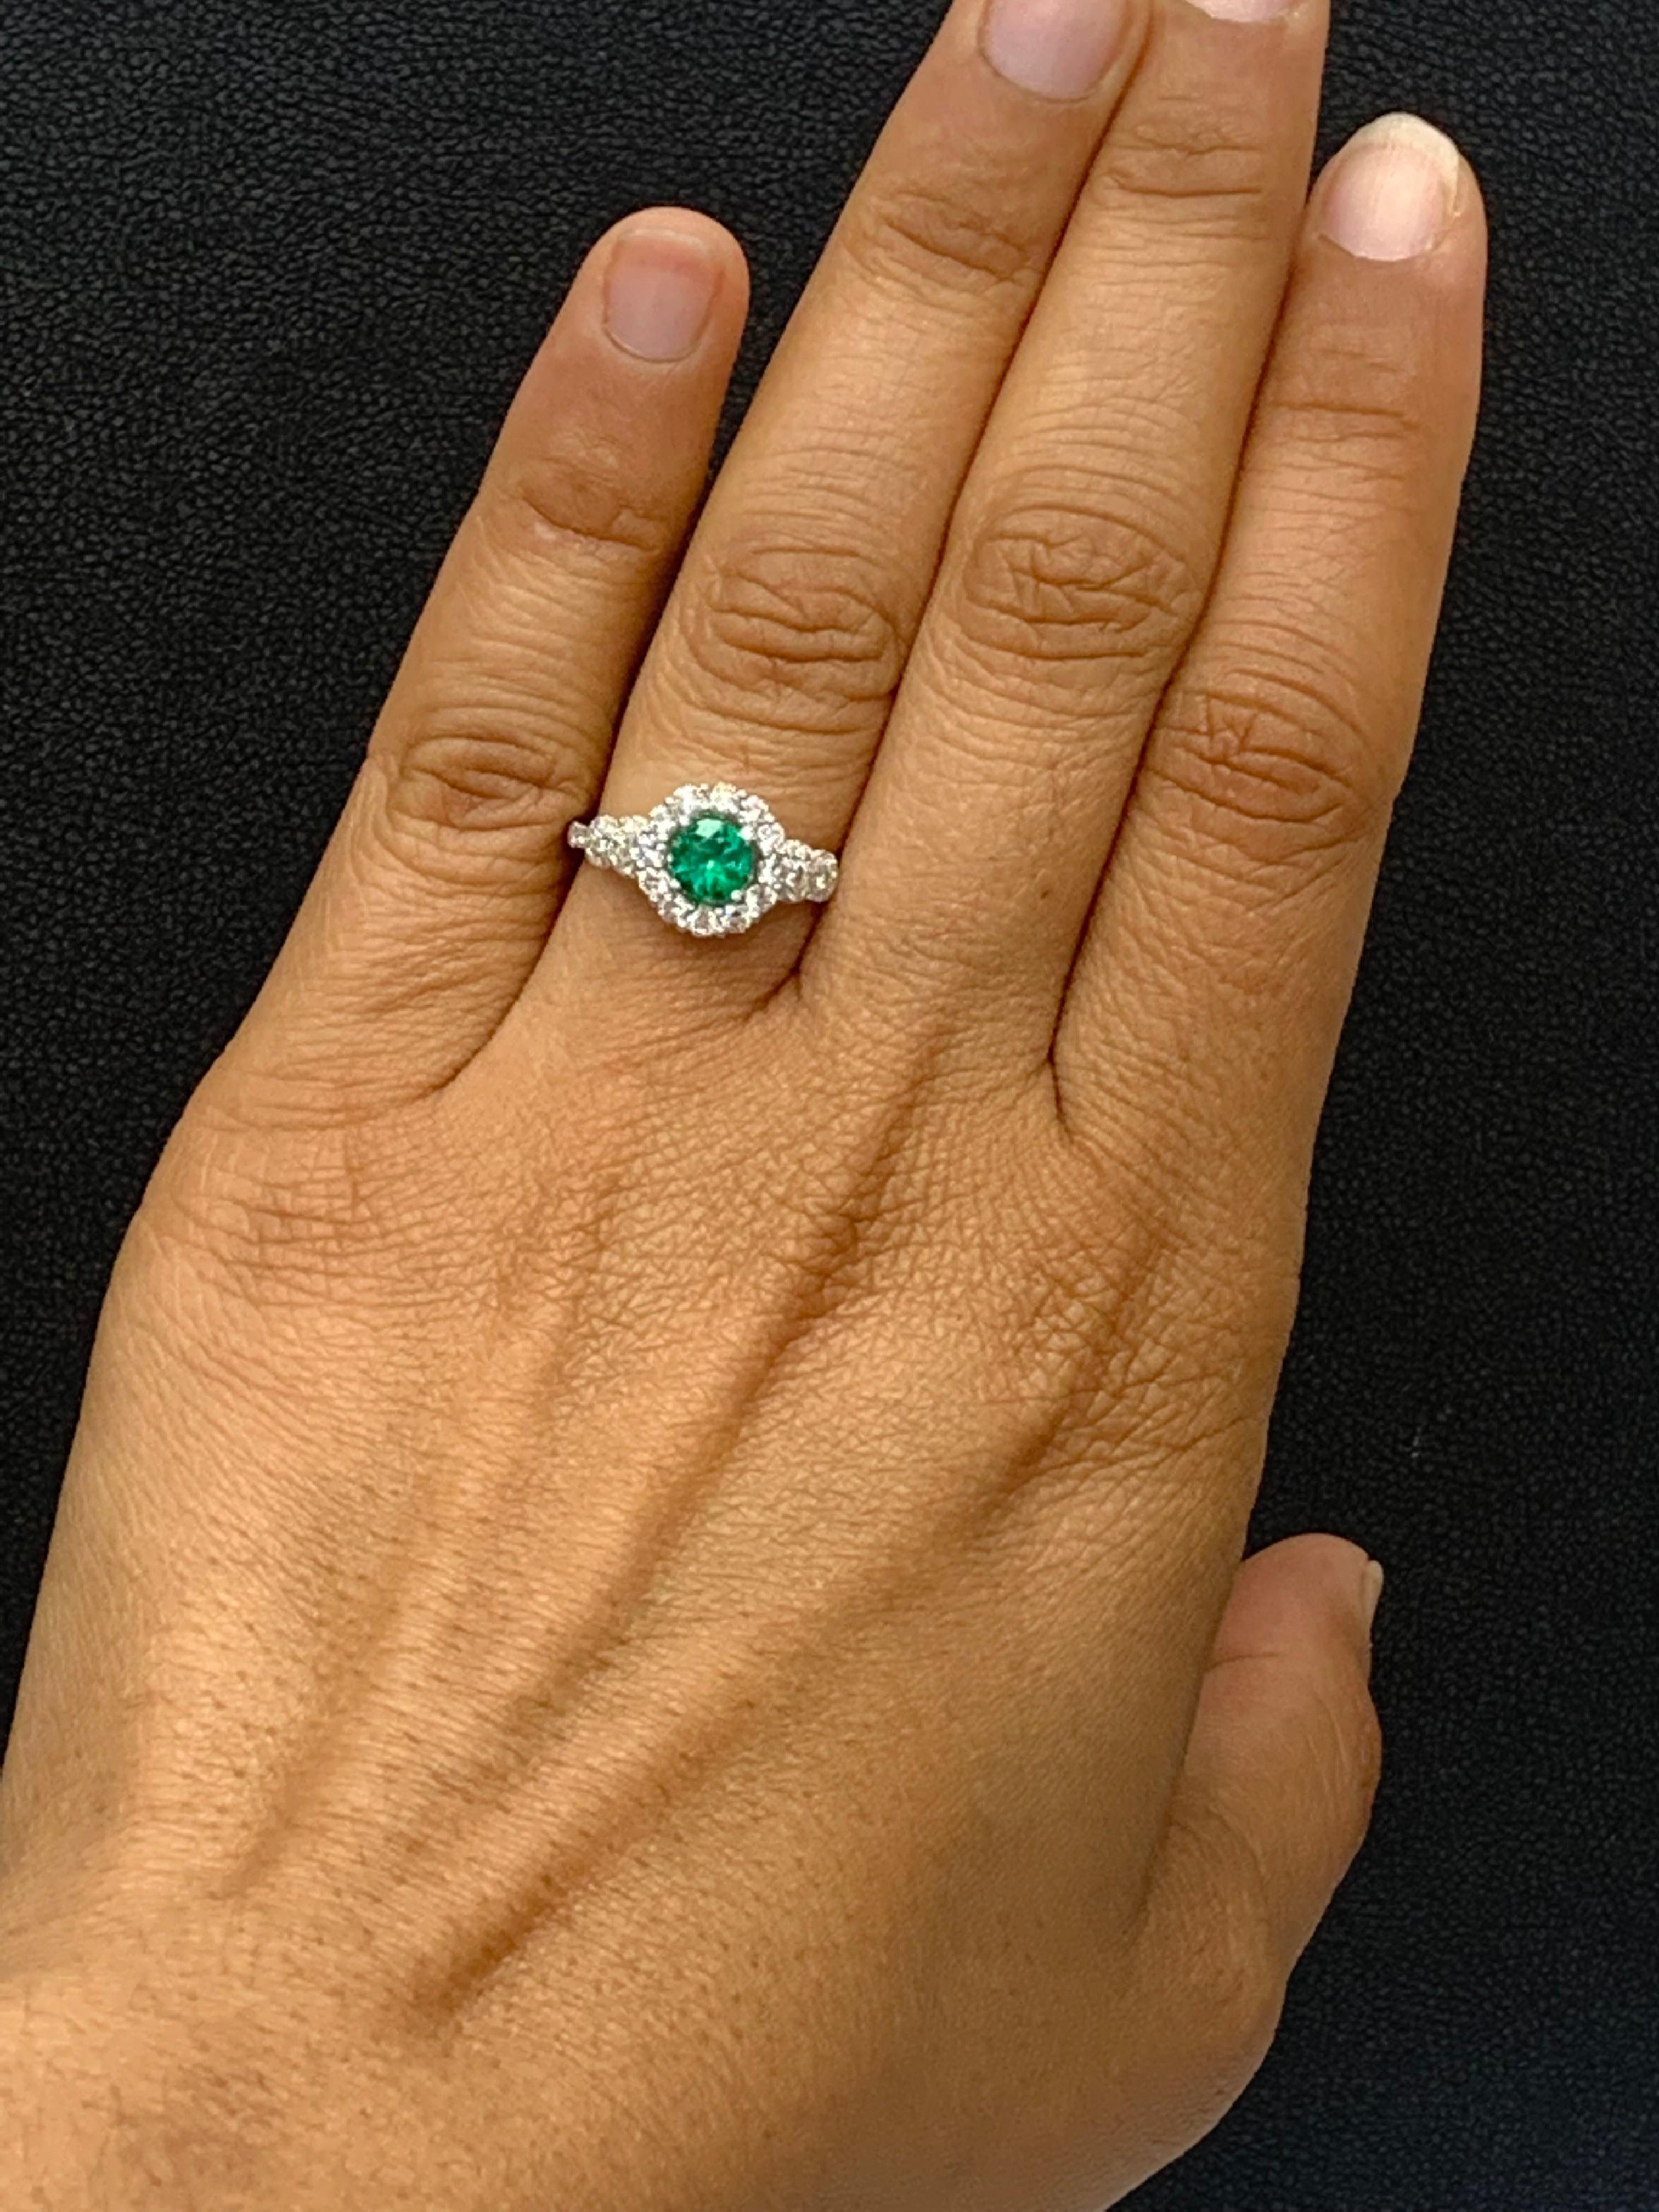 Features a gorgeous flower design  0.62 carat round cut lush green emerald ring surrounded by a row of brilliant-cut 12 diamonds weighing 0.62 carats in total. Made in 18k white gold.